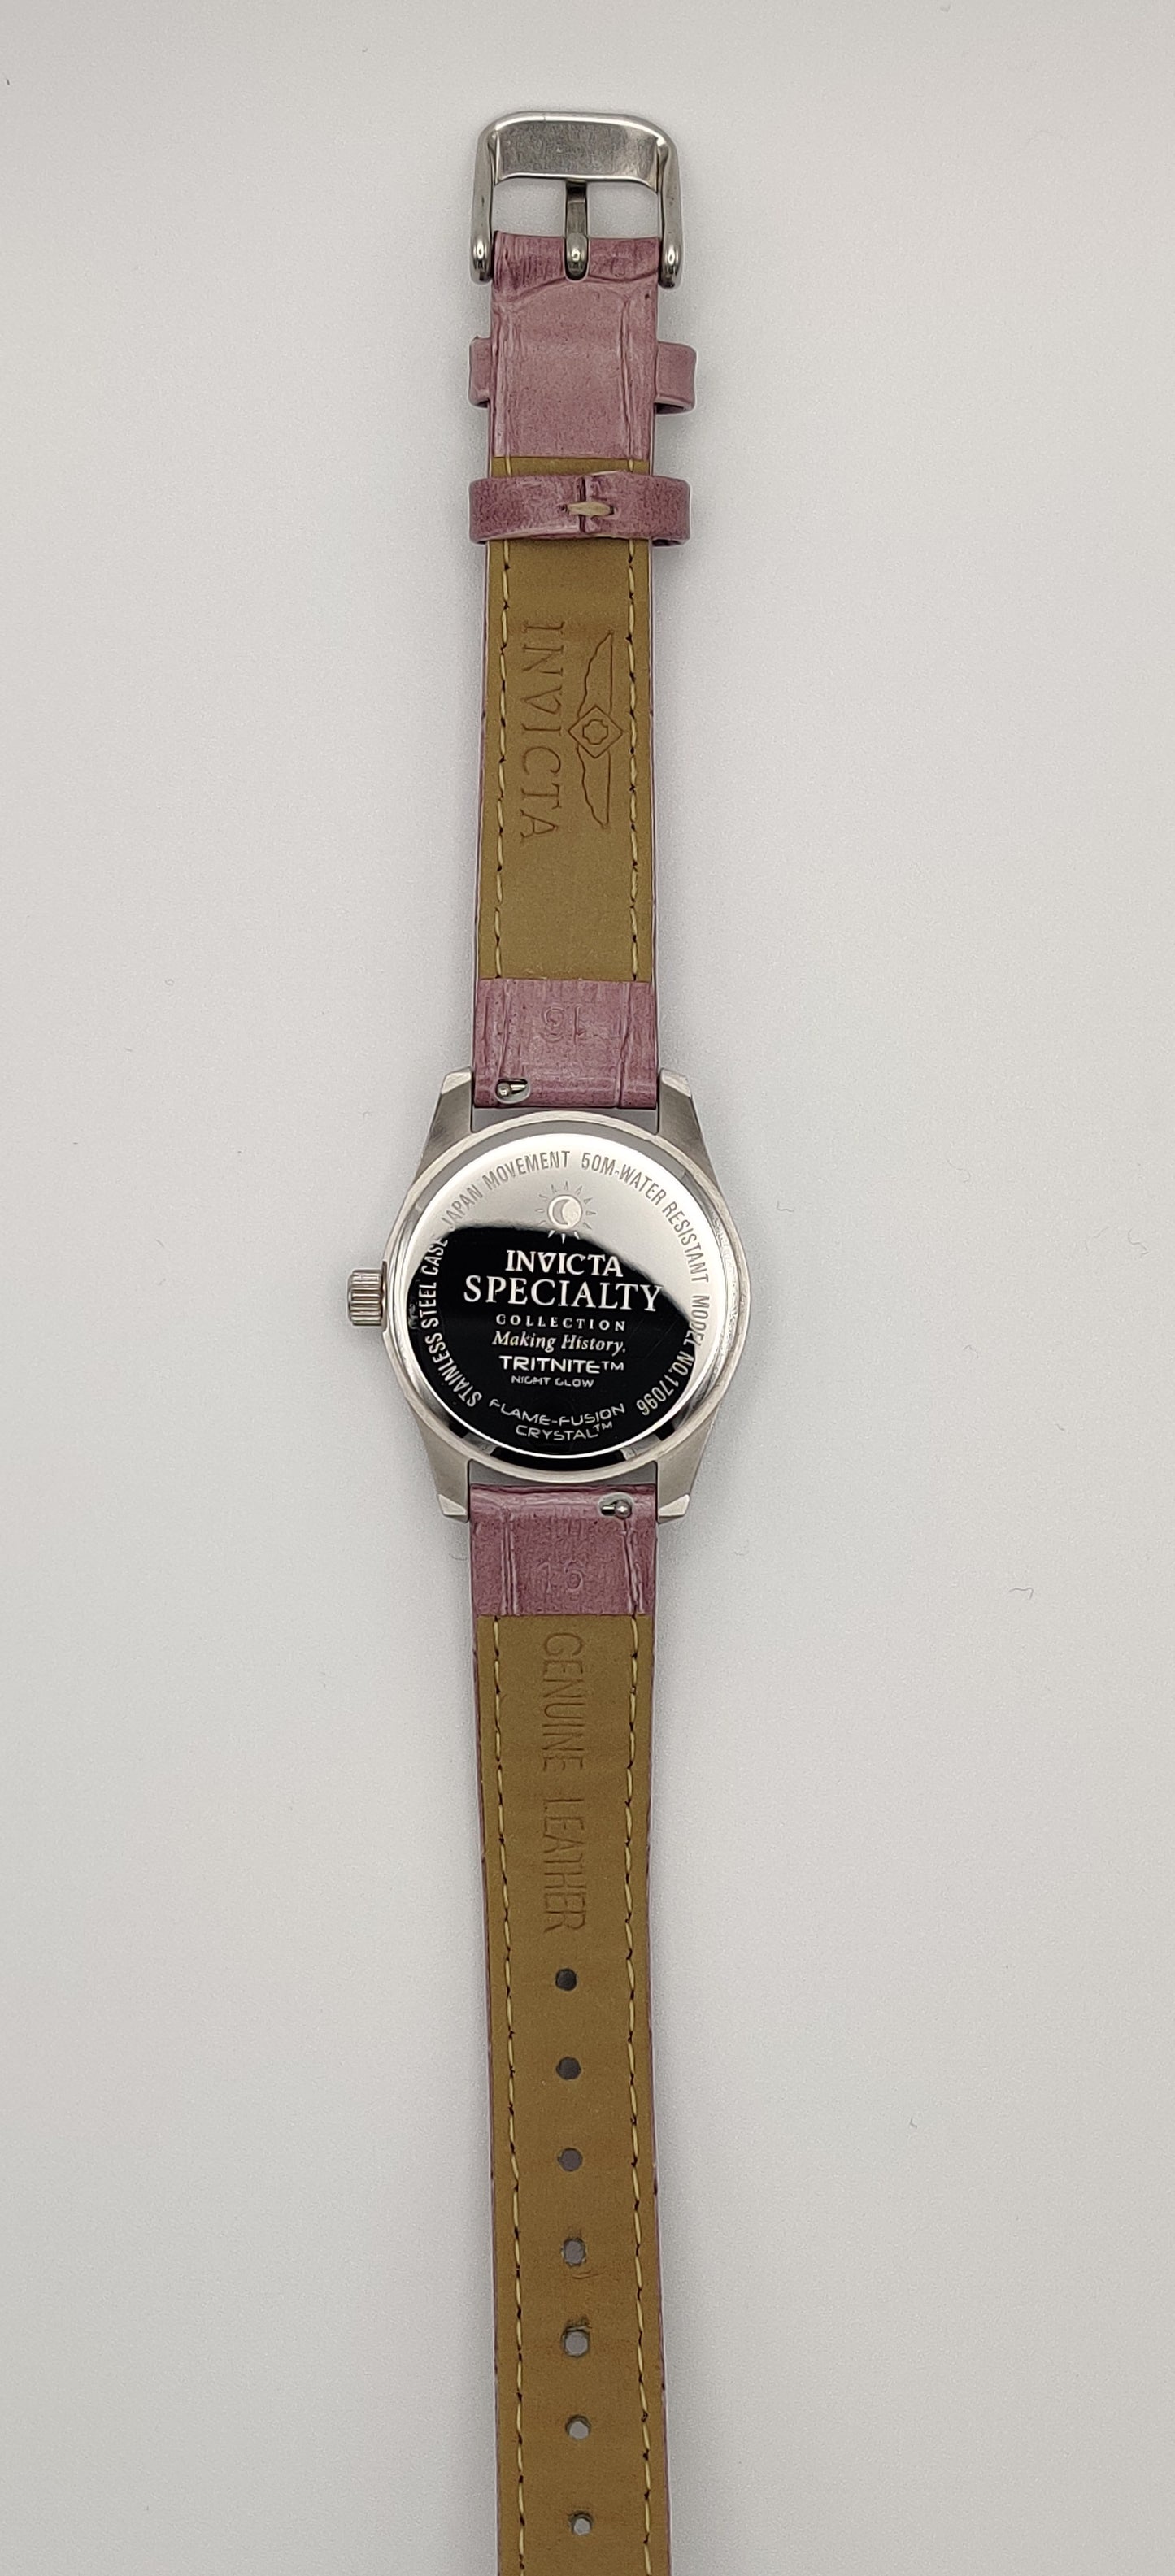 Invicta Specialty Collection Violet Women's Watch